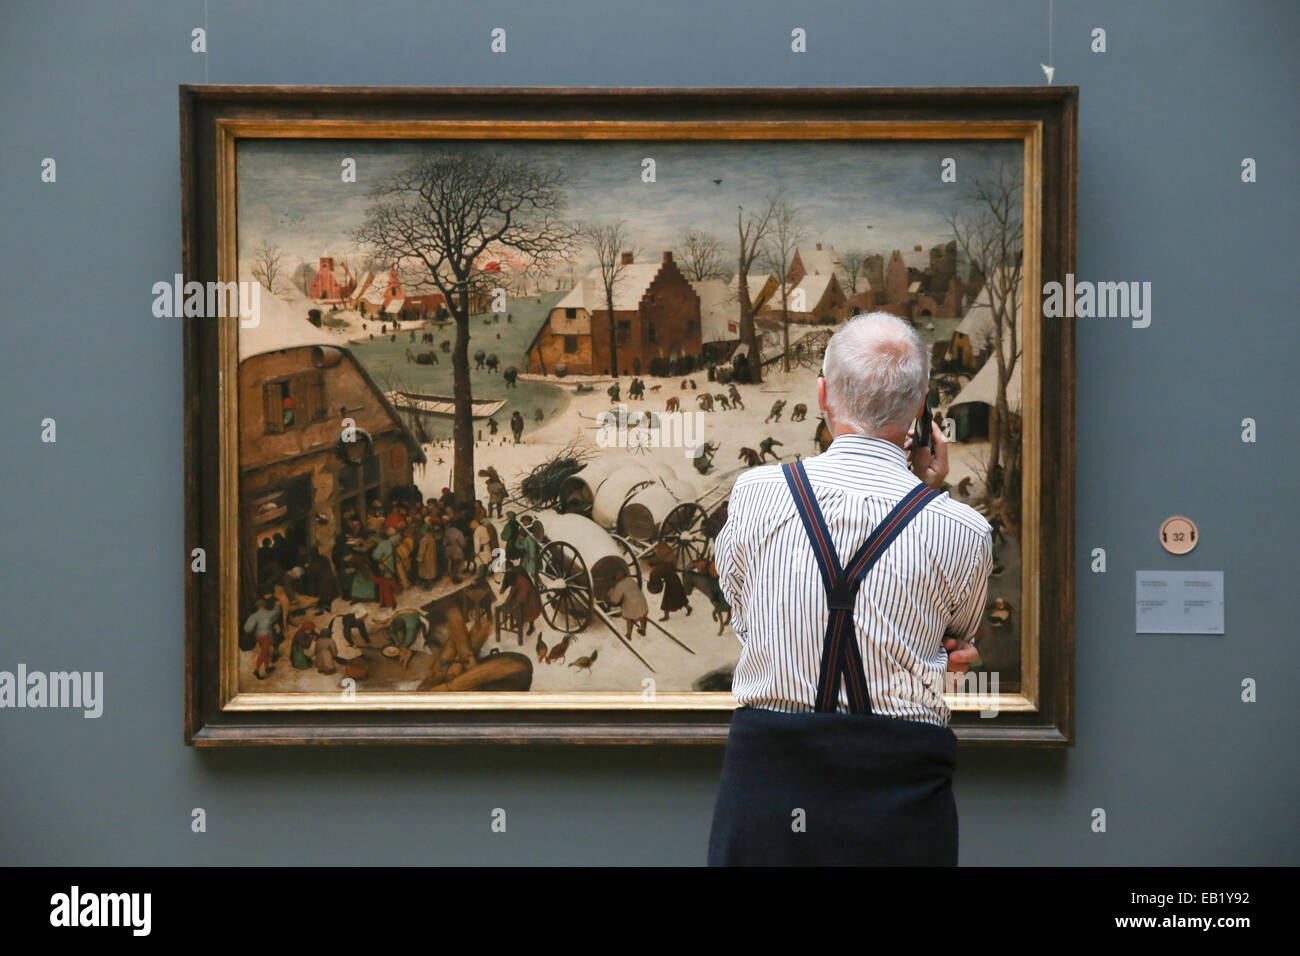 old white hair man male tourist painting art gallery europe brussels Stock Photo